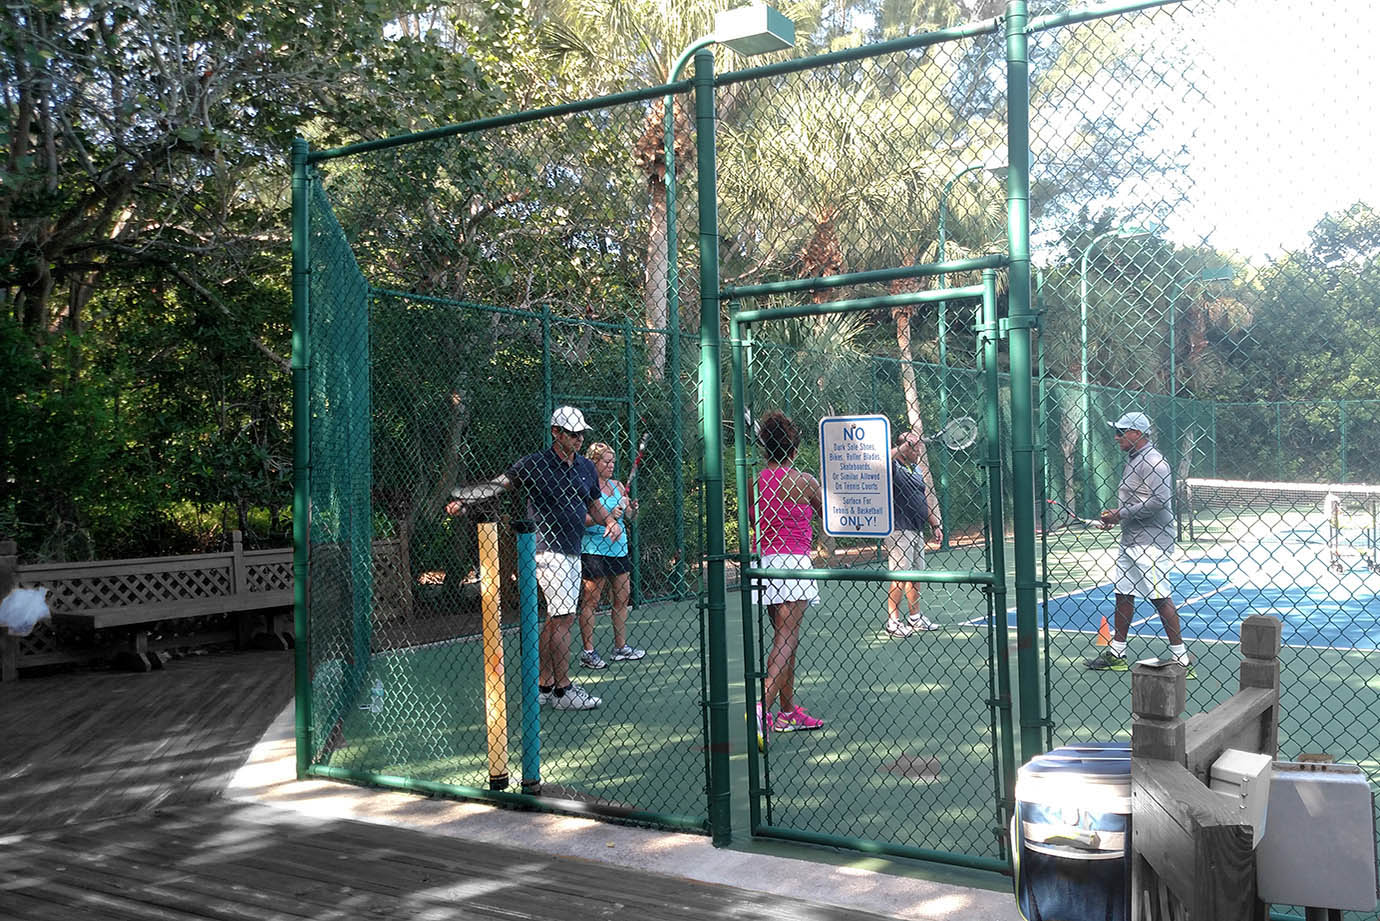 Group of people inside outdoor tennis court with fence near trees at the Sea Oats Estate in Captiva Island, FL